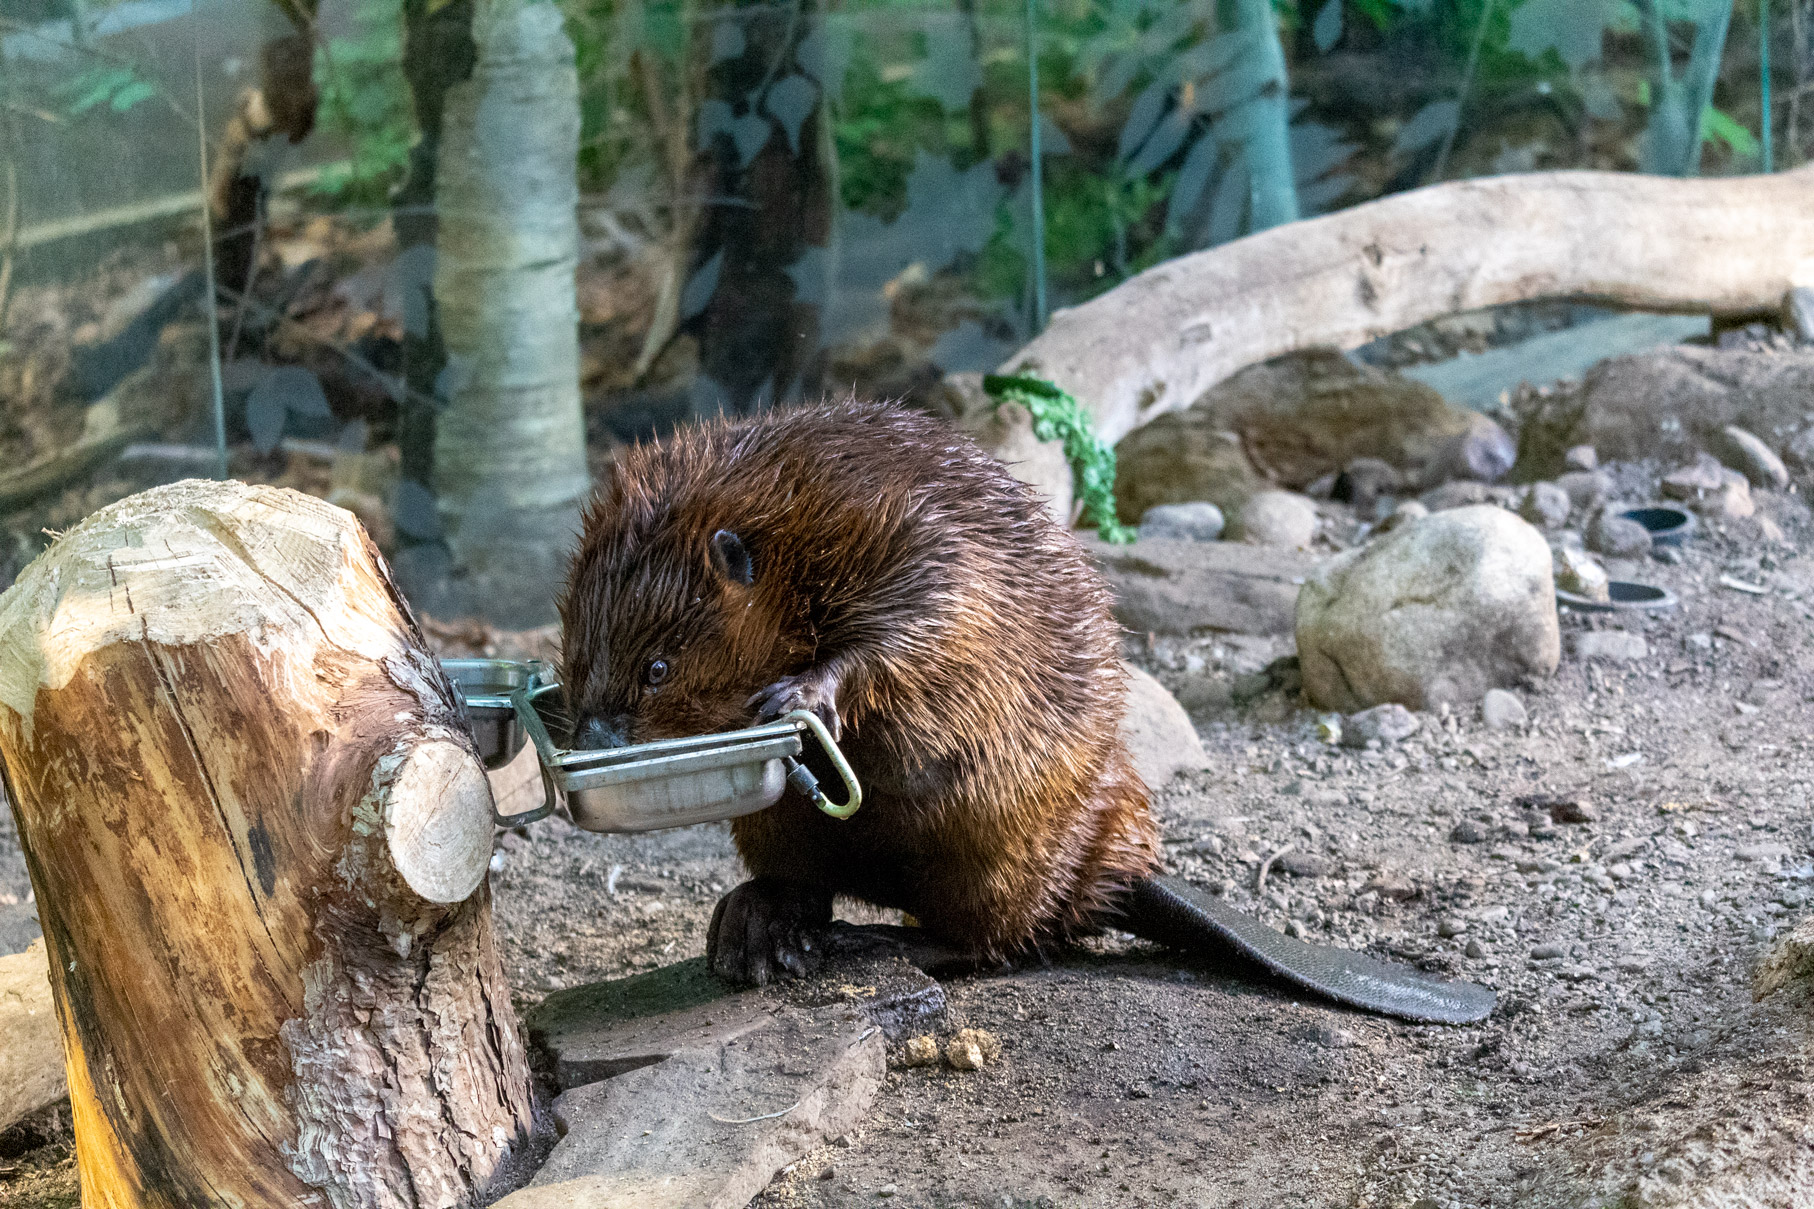 Beaver eating from a metal tray attached to a log in a wooded environment